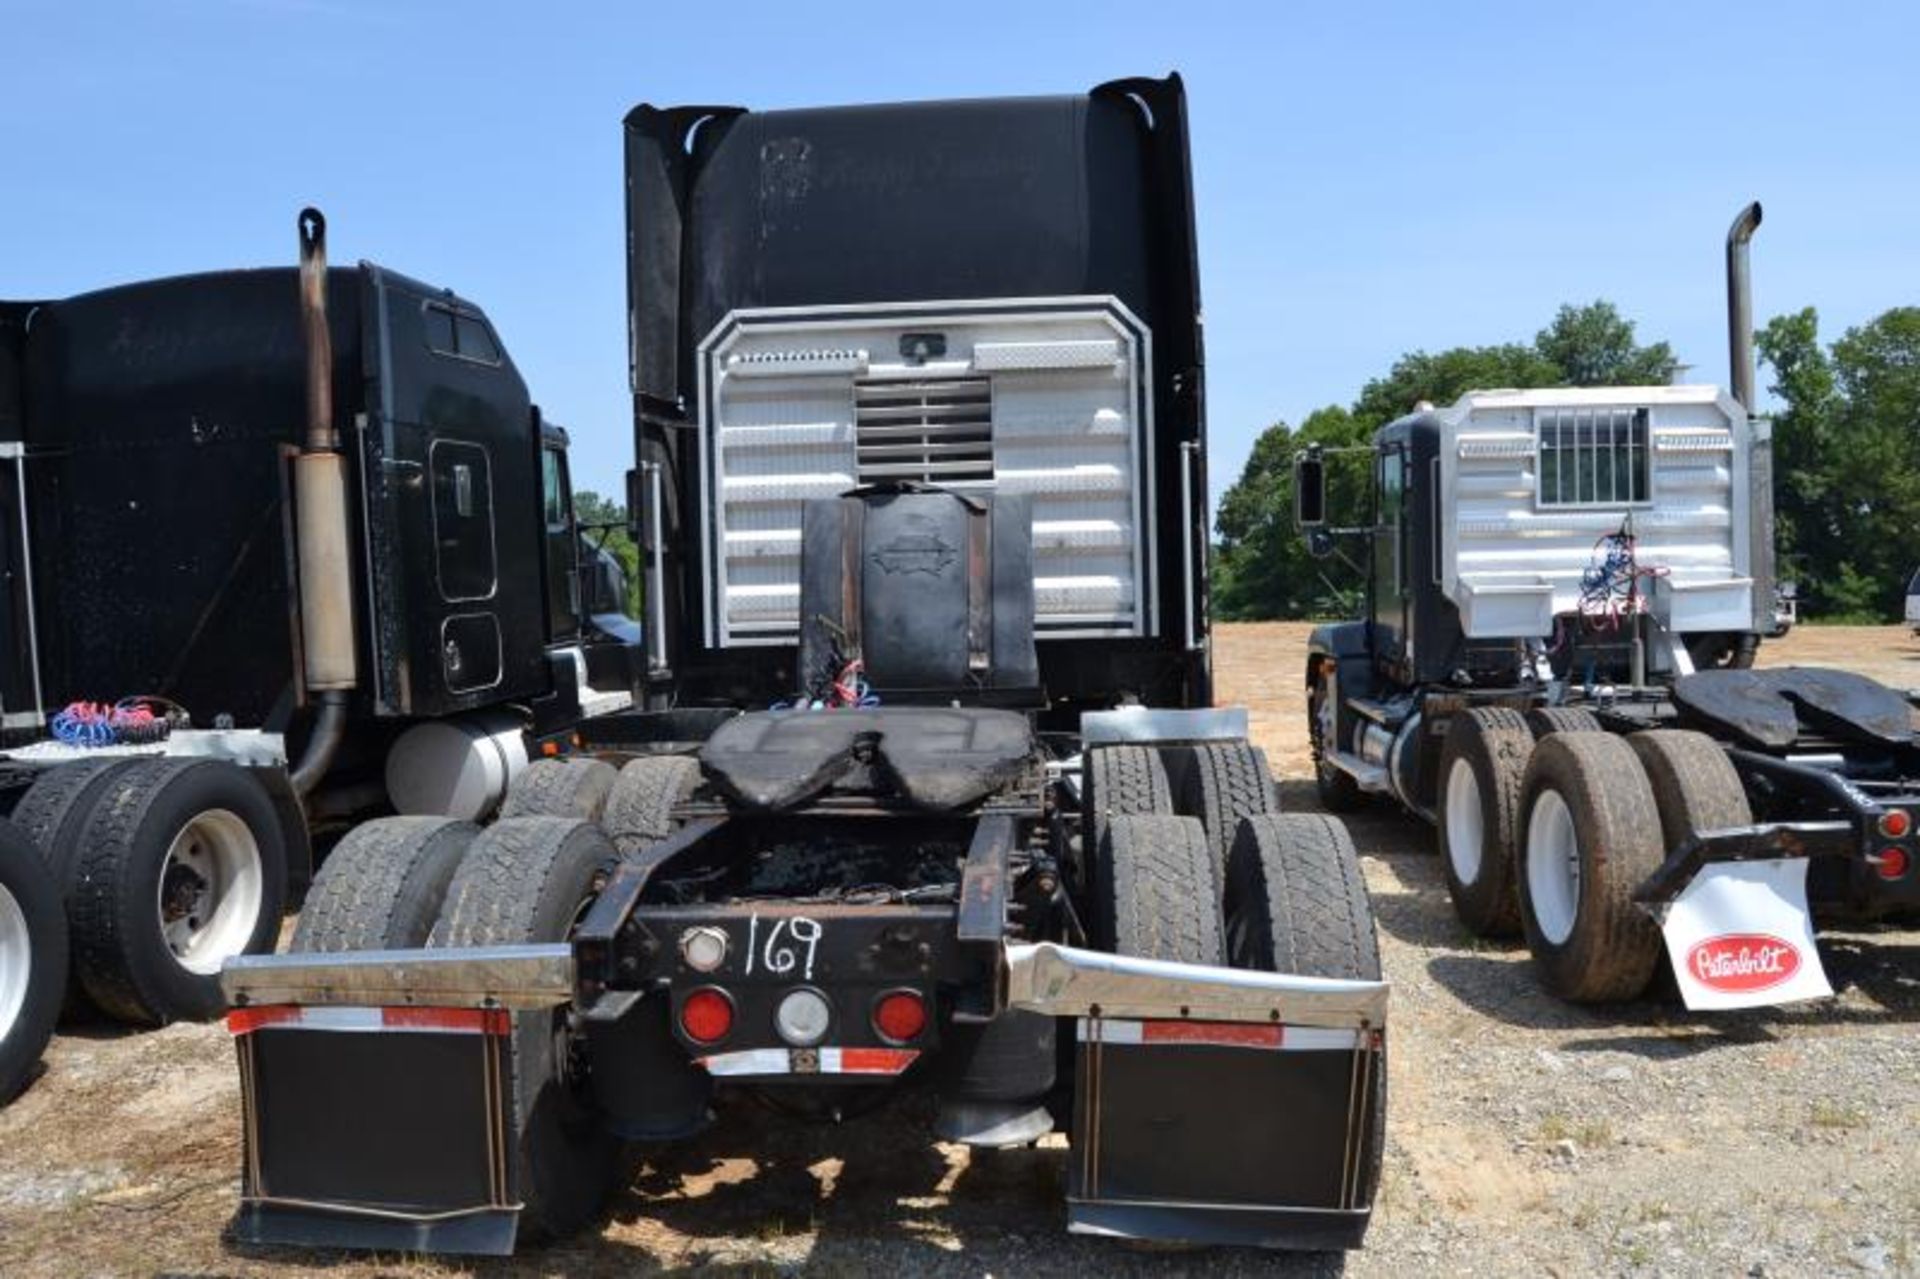 1997 FREIGHTLINER ROAD TRACTOR W/ SLEEPER W/ CAT ENGINE W/ 13 SPEED TRANS W/ AIR RIDE 1044060 MILES - Image 3 of 3